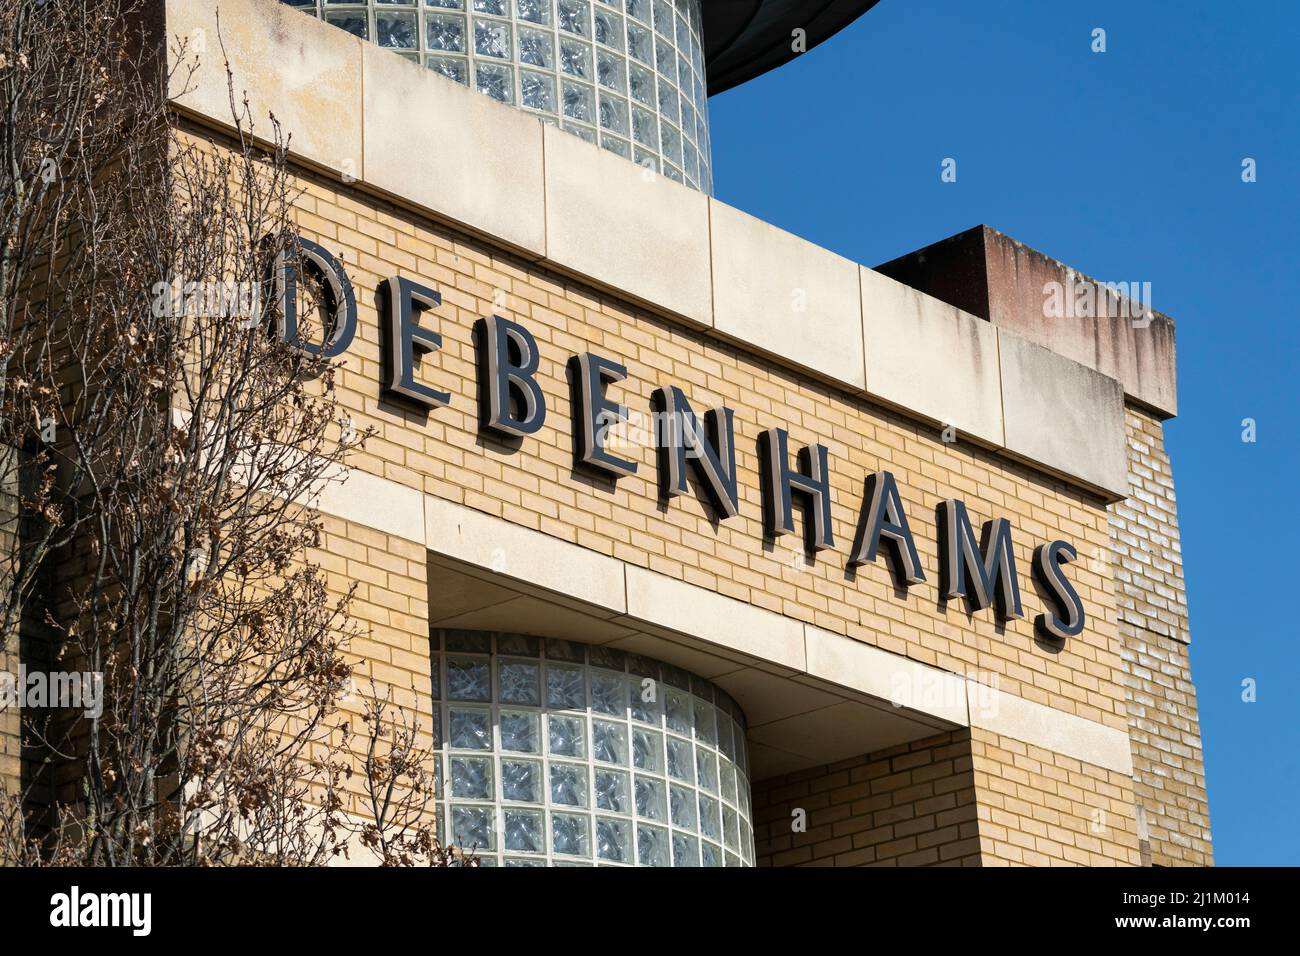 Nearly 90% of former Debenhams stores remain empty almost a year after the department store closed and went into administration. Basingstoke, UK Stock Photo